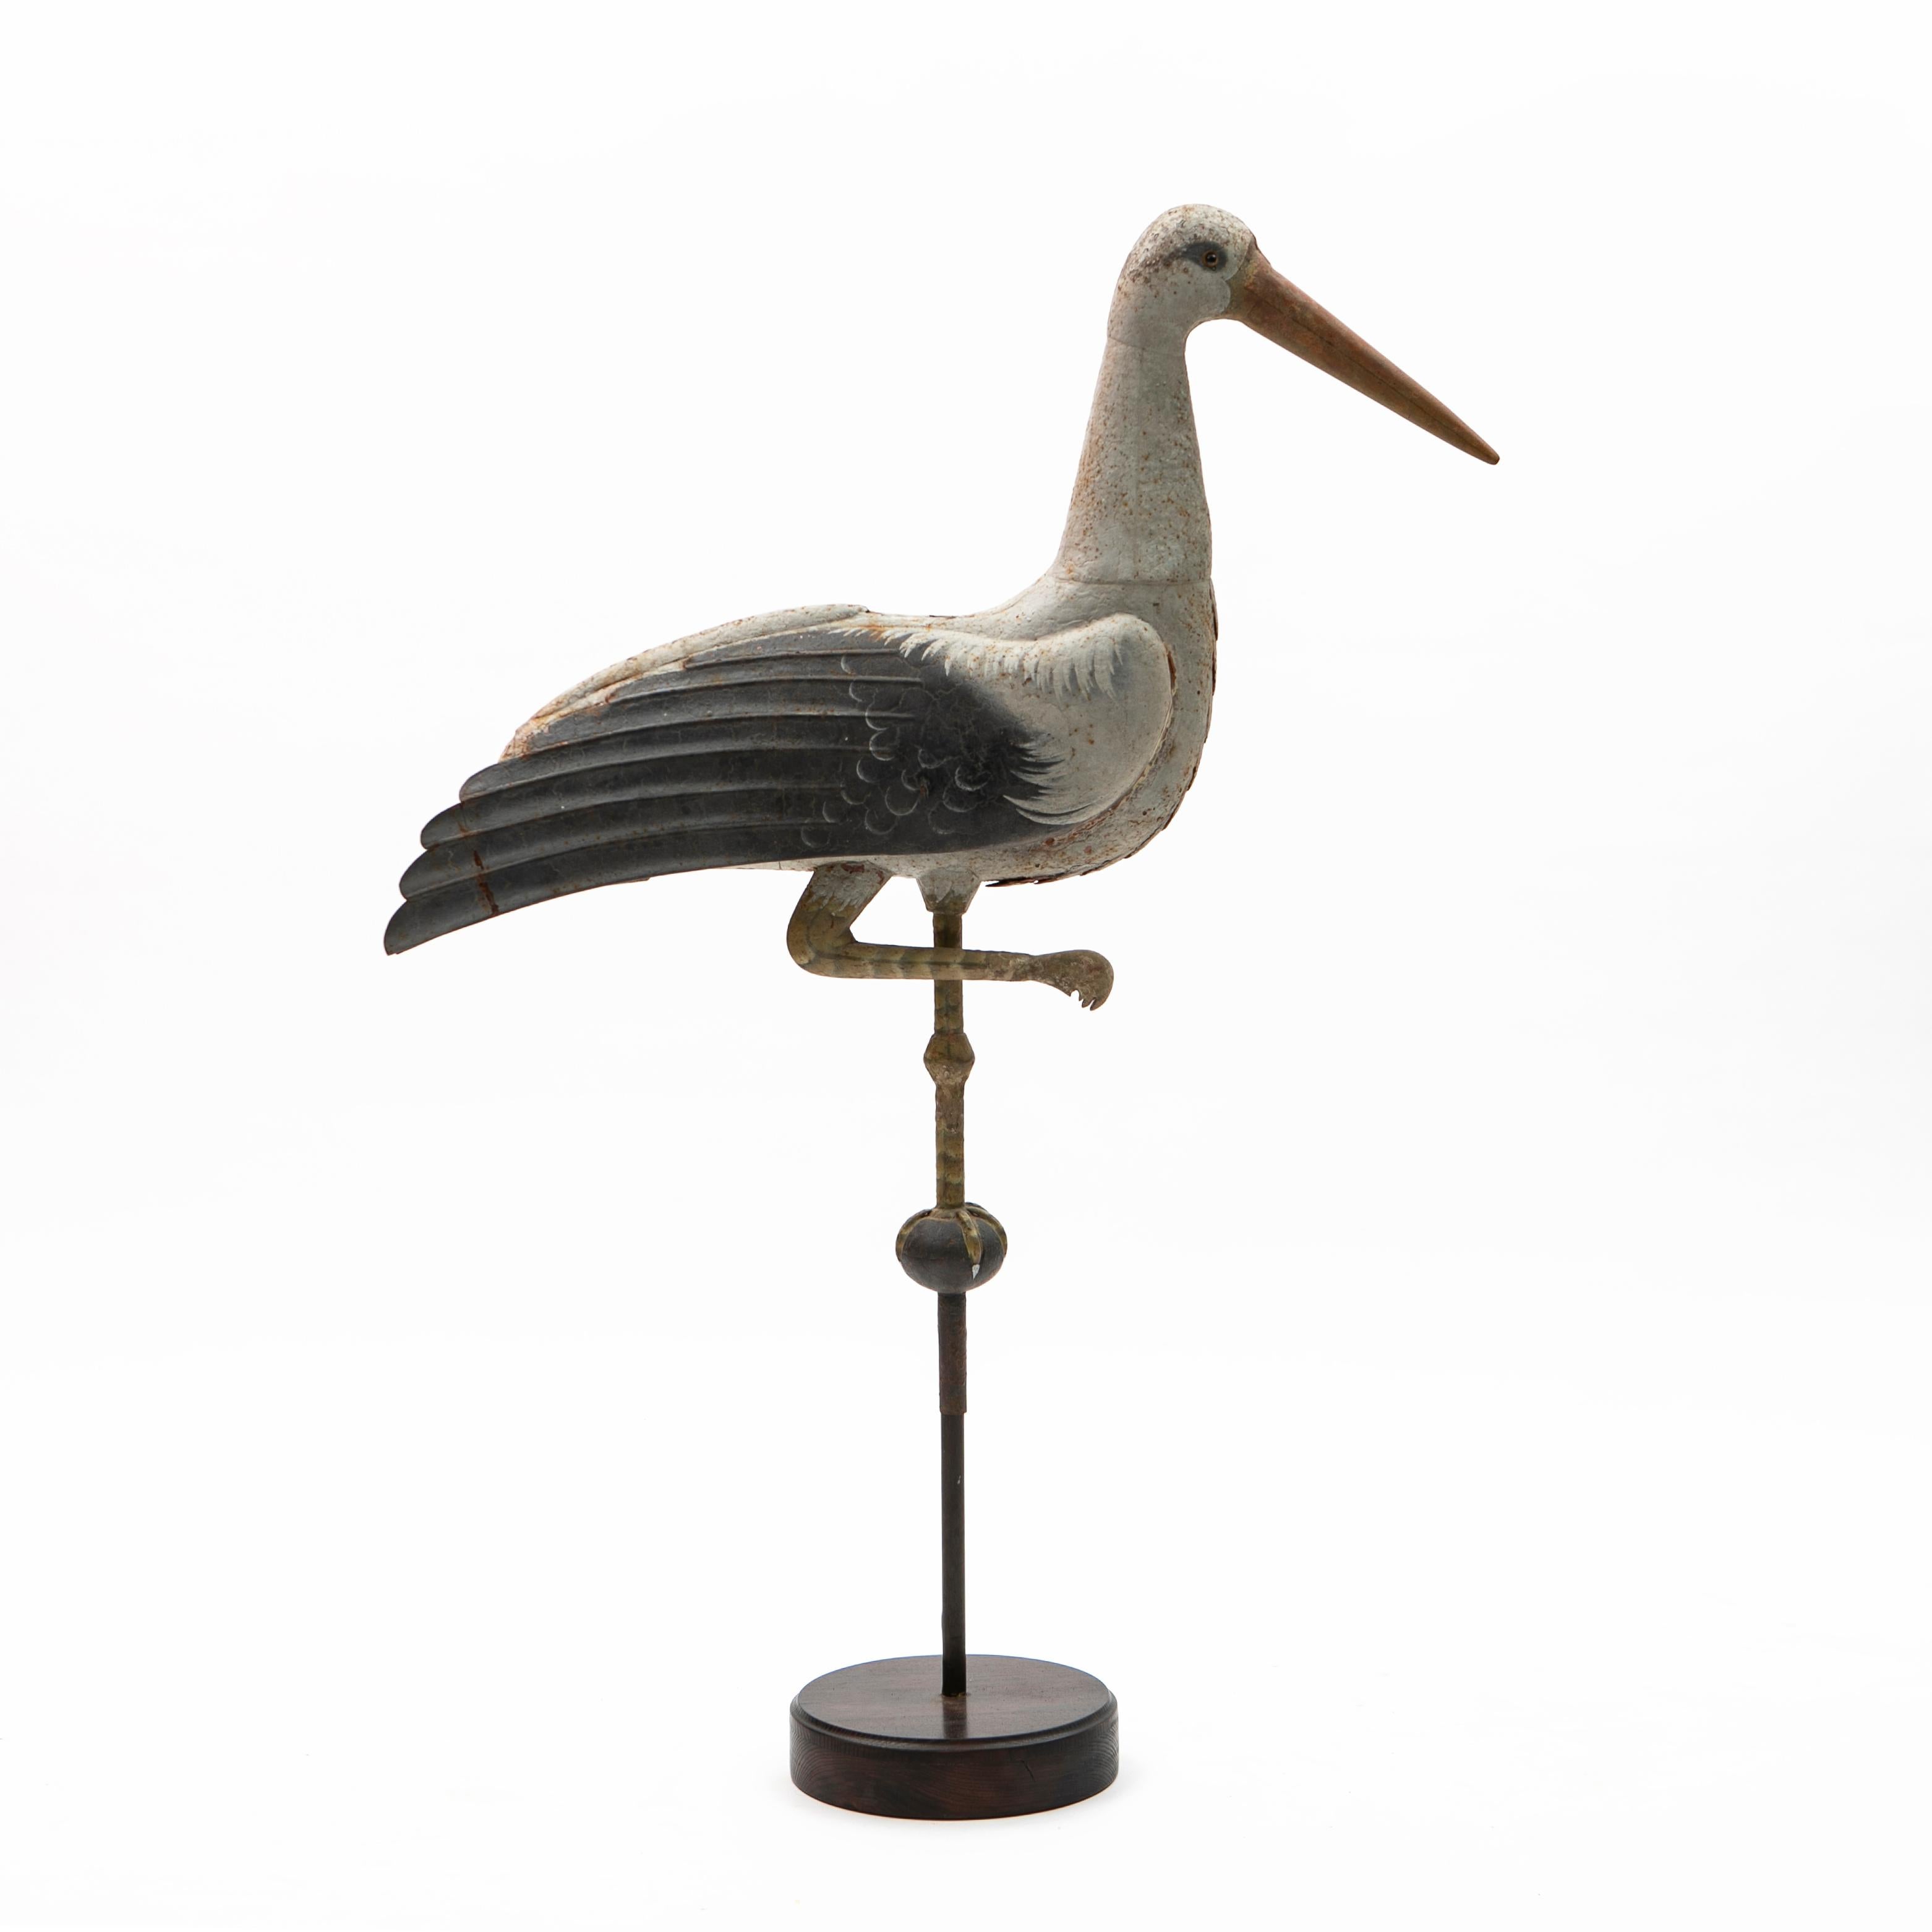 Wonderful and rare decorative weather vane in the form of a standing stork. 
Original hand painted metal. Height: 123 cm.

Presumably from a French Château, 1800s.

The weathervane has been later mounted onto a wooden base, but it is